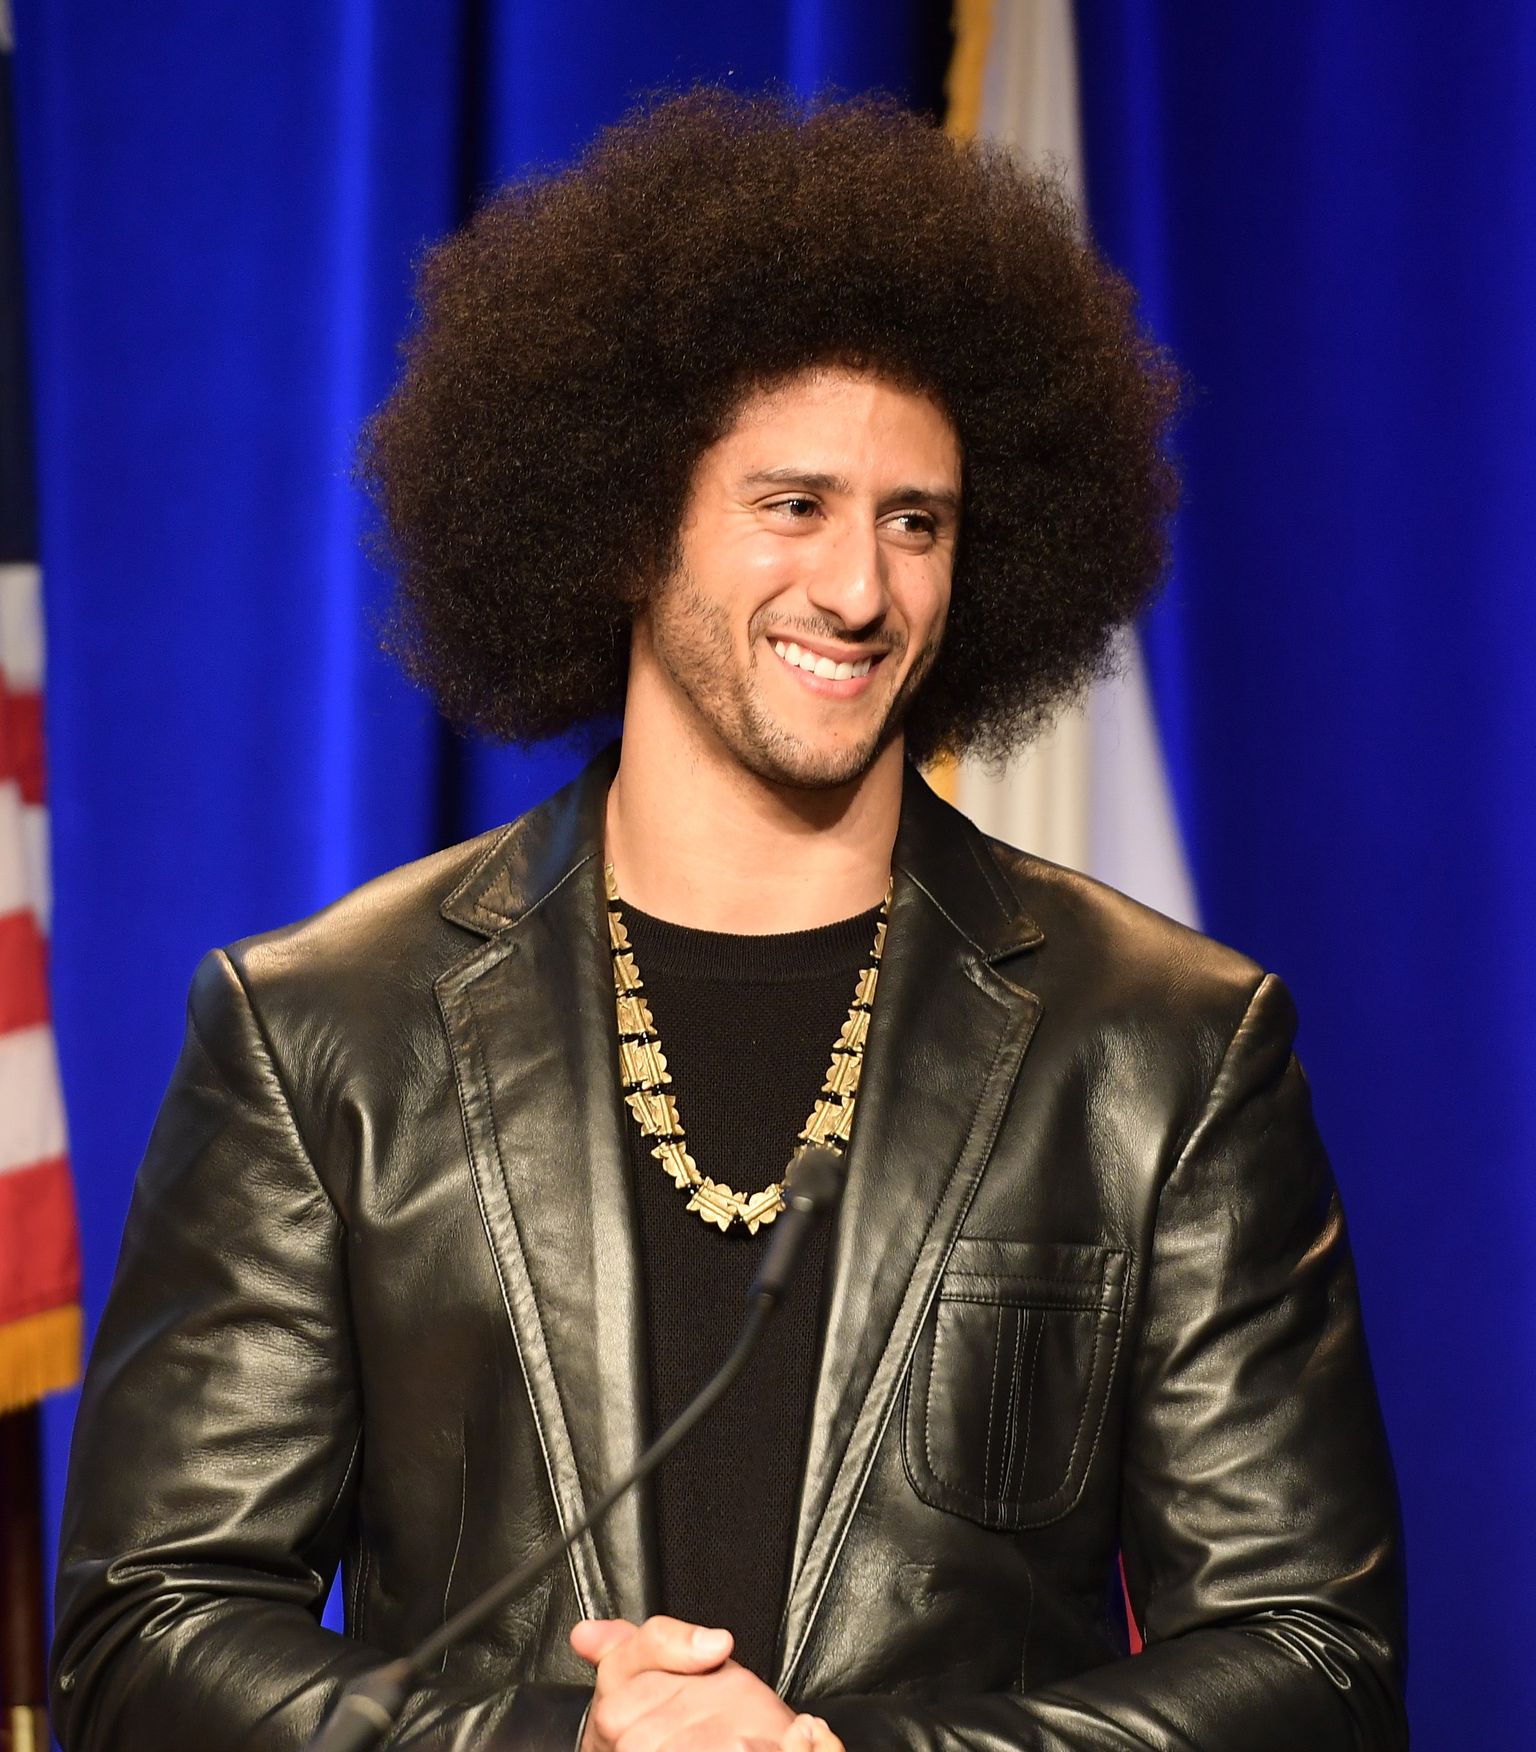 Colin Kaepernick during the ACLU SoCal Hosts Annual Bill of Rights Dinner at the Beverly Wilshire Four Seasons Hotel on December 3, 2017, in Beverly Hills, California. | Source: Getty Images